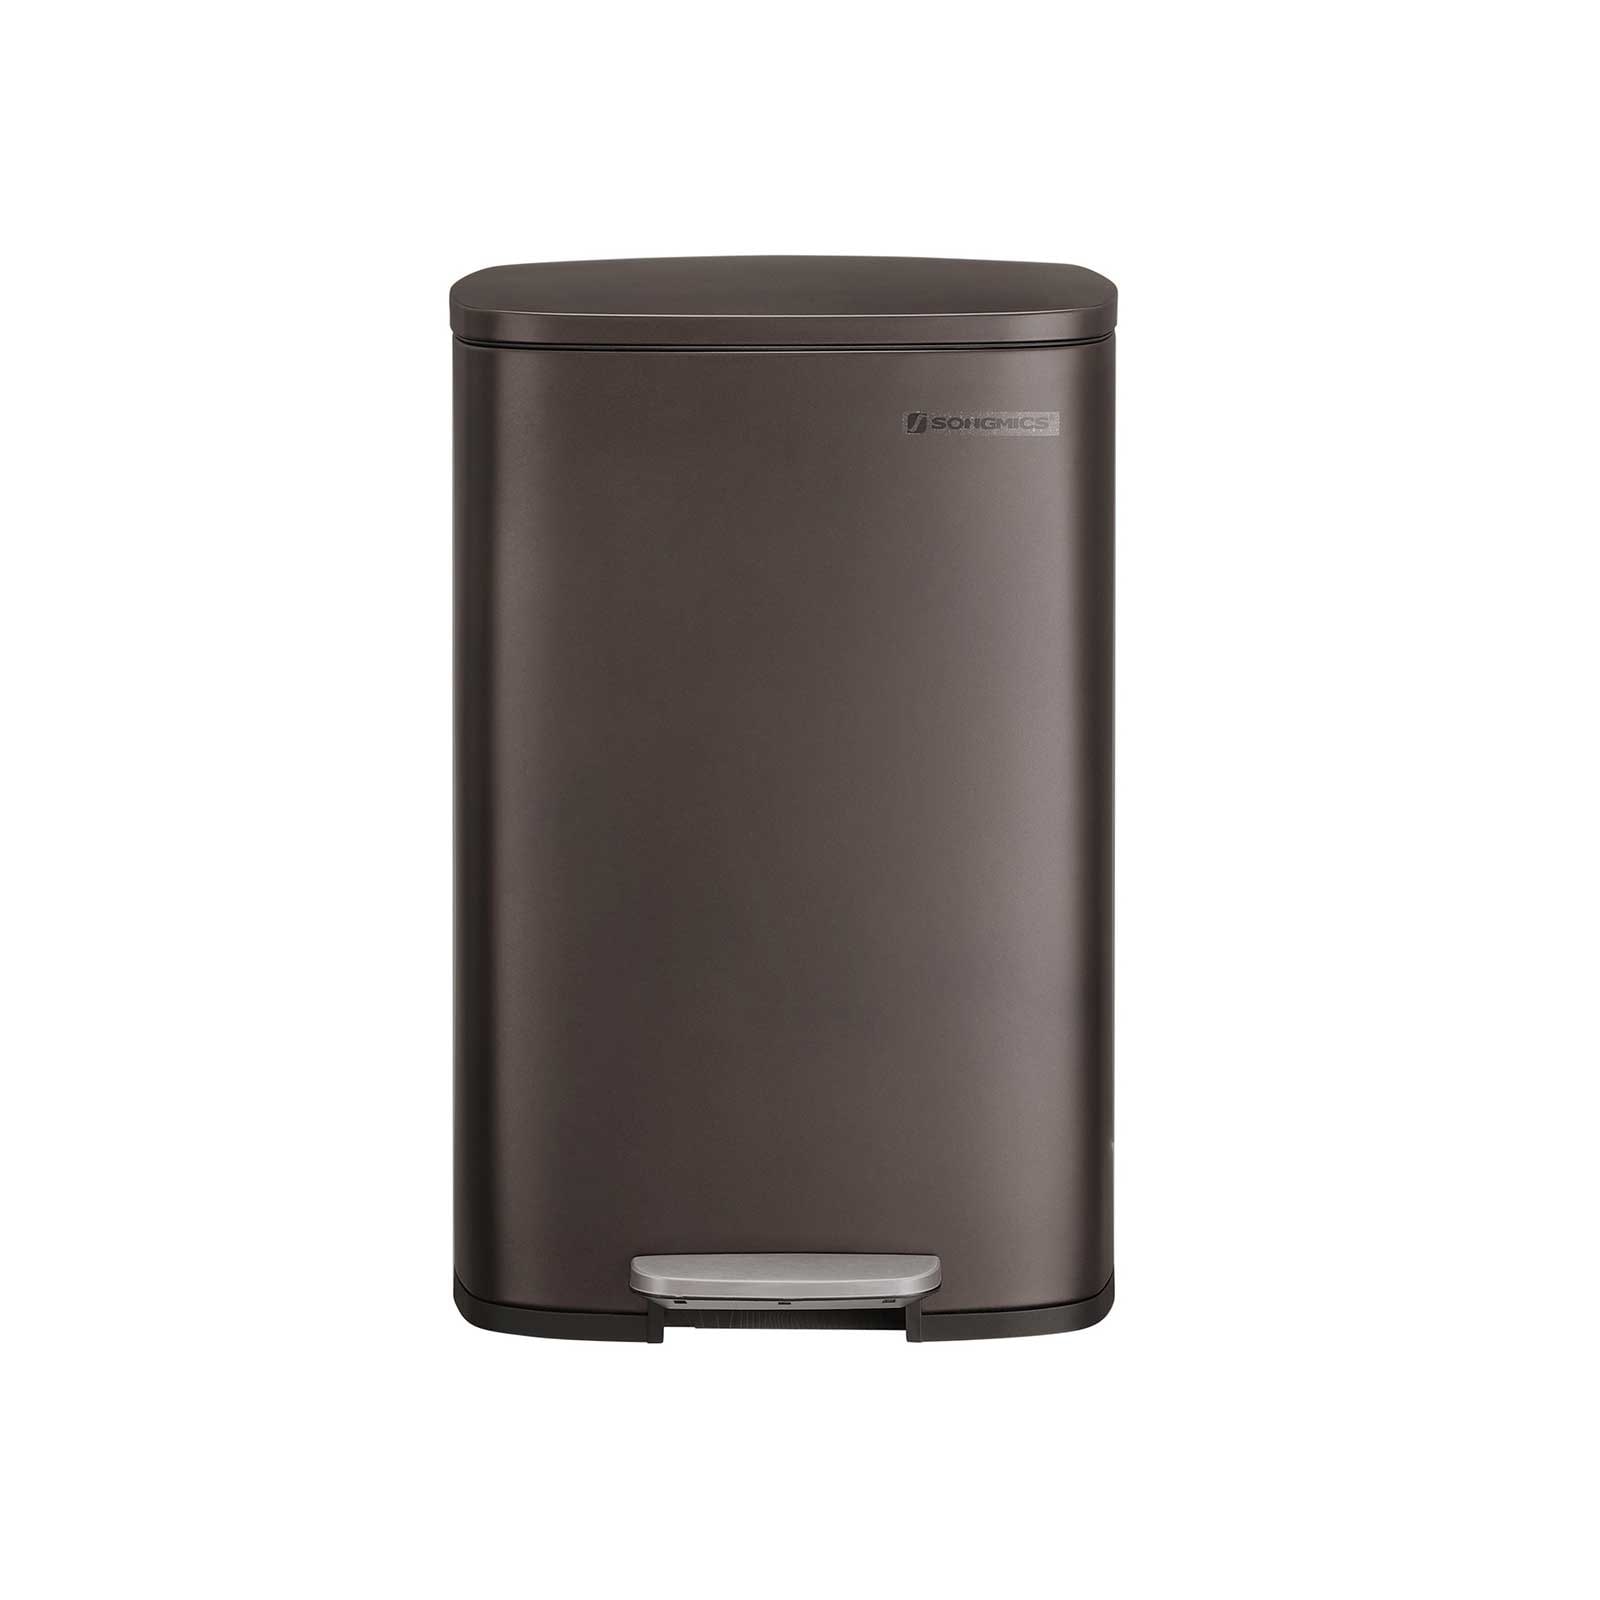 SONGMICS Slim Trash Can, 12.7 Gallon Garbage Can for Narrow Spaces